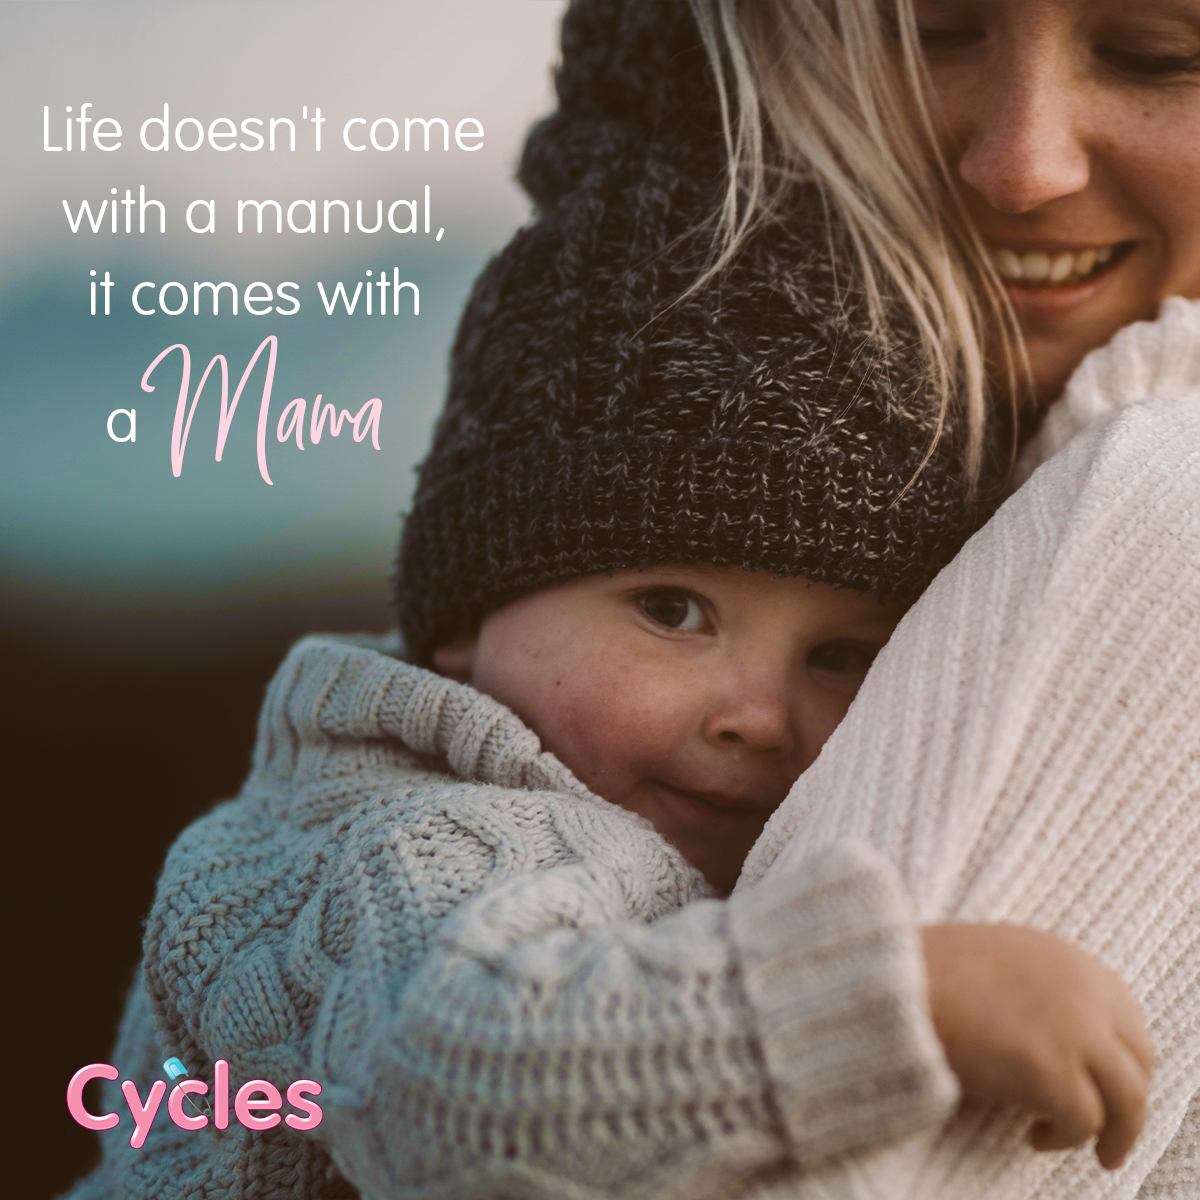 Life doesn't come with a manual, it comes with a Mama